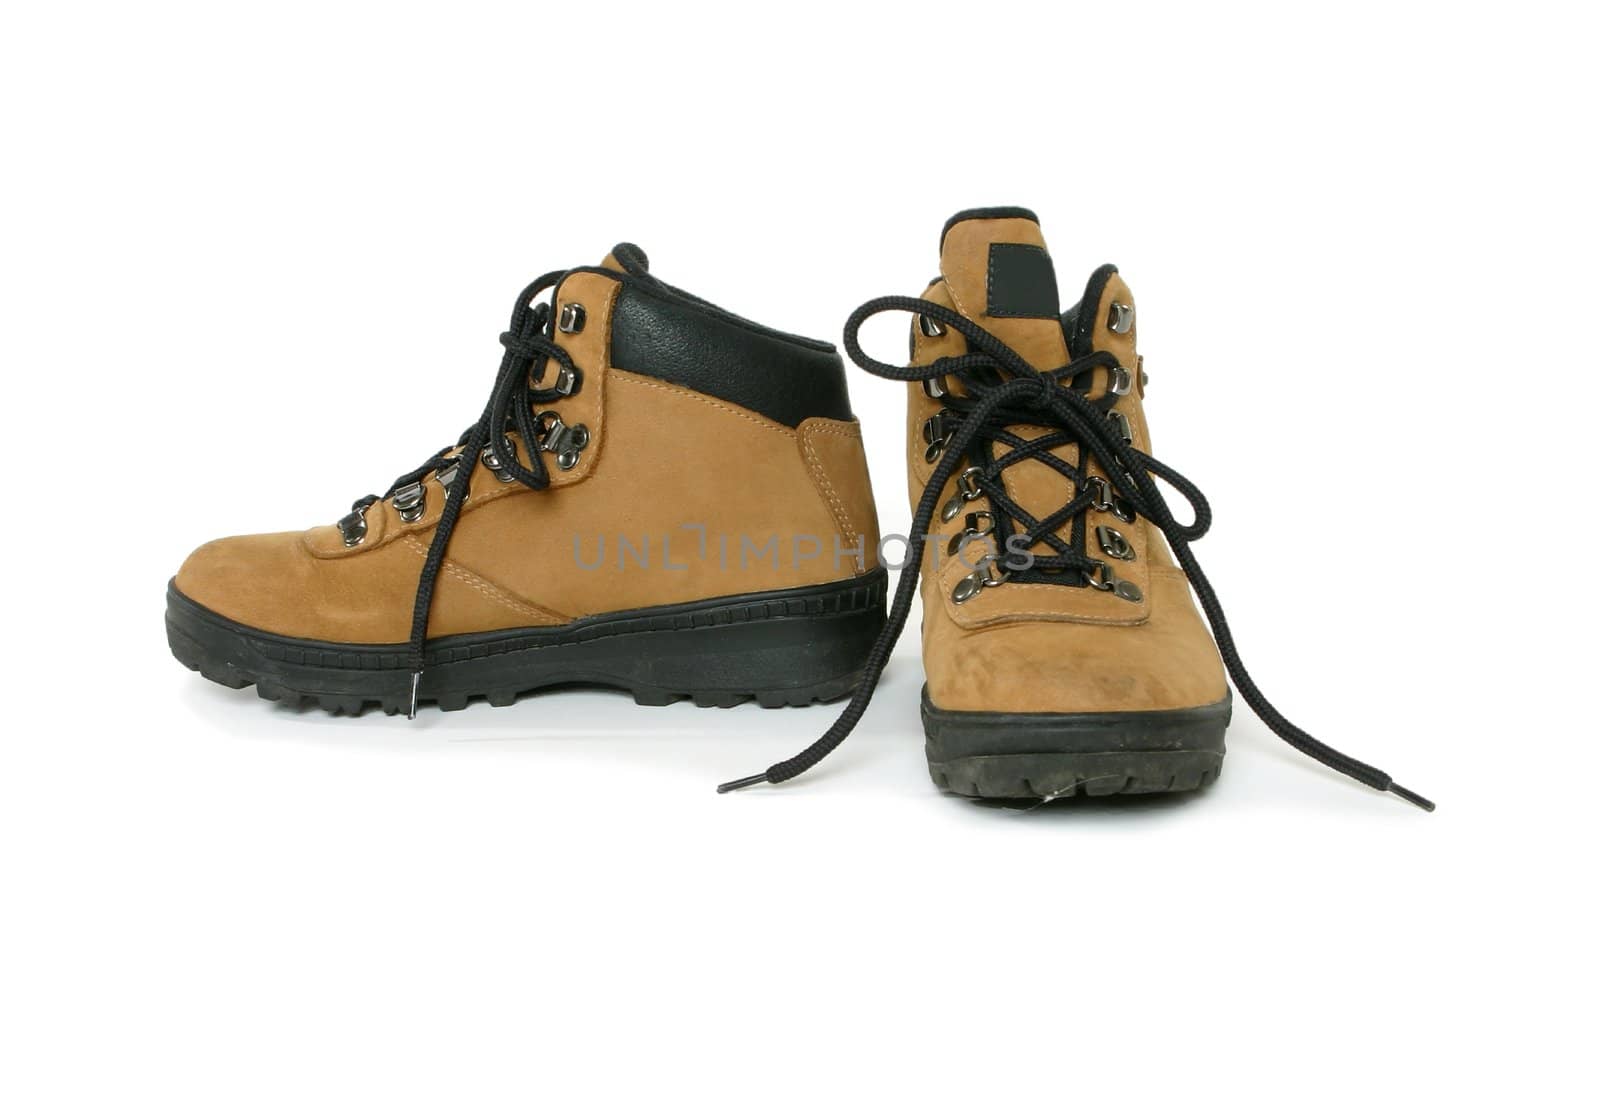 A pair of hiking or leisure boots